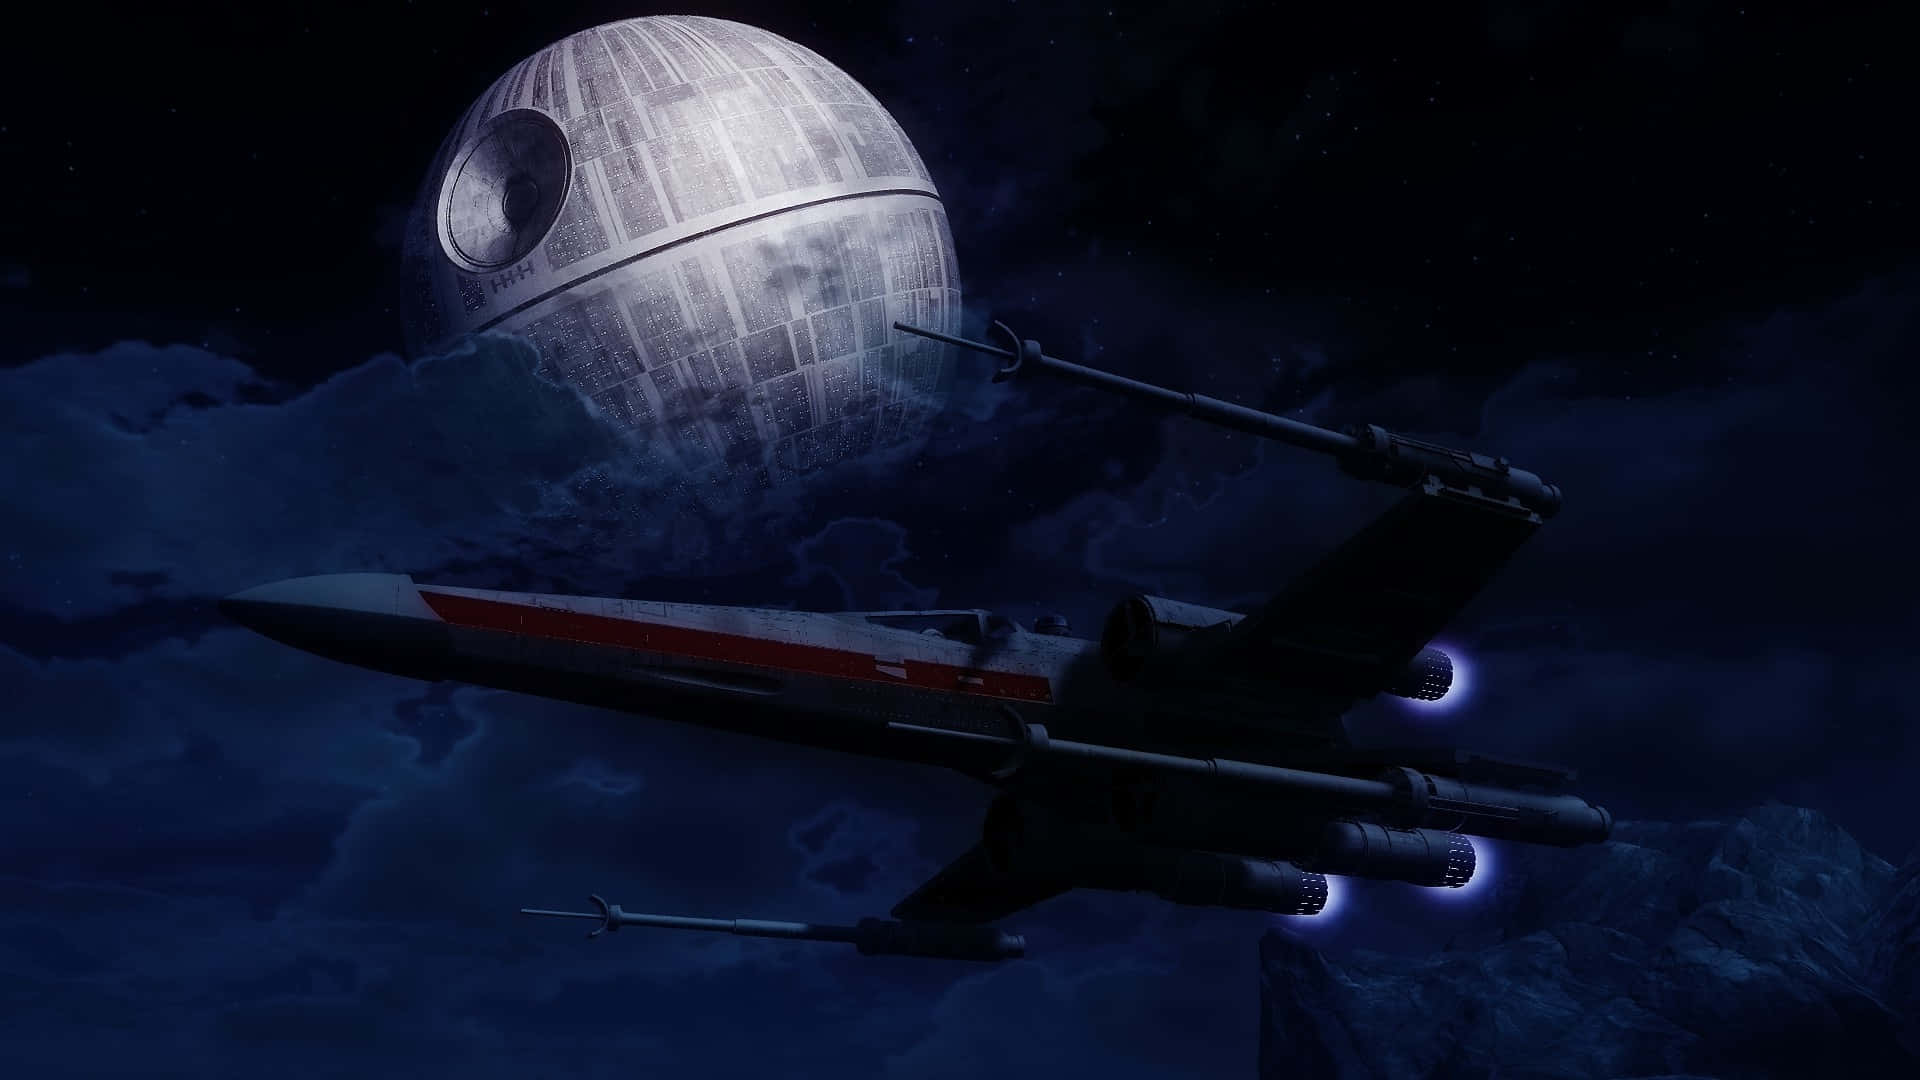 The Foreboding and Powerful Death Star II Wallpaper